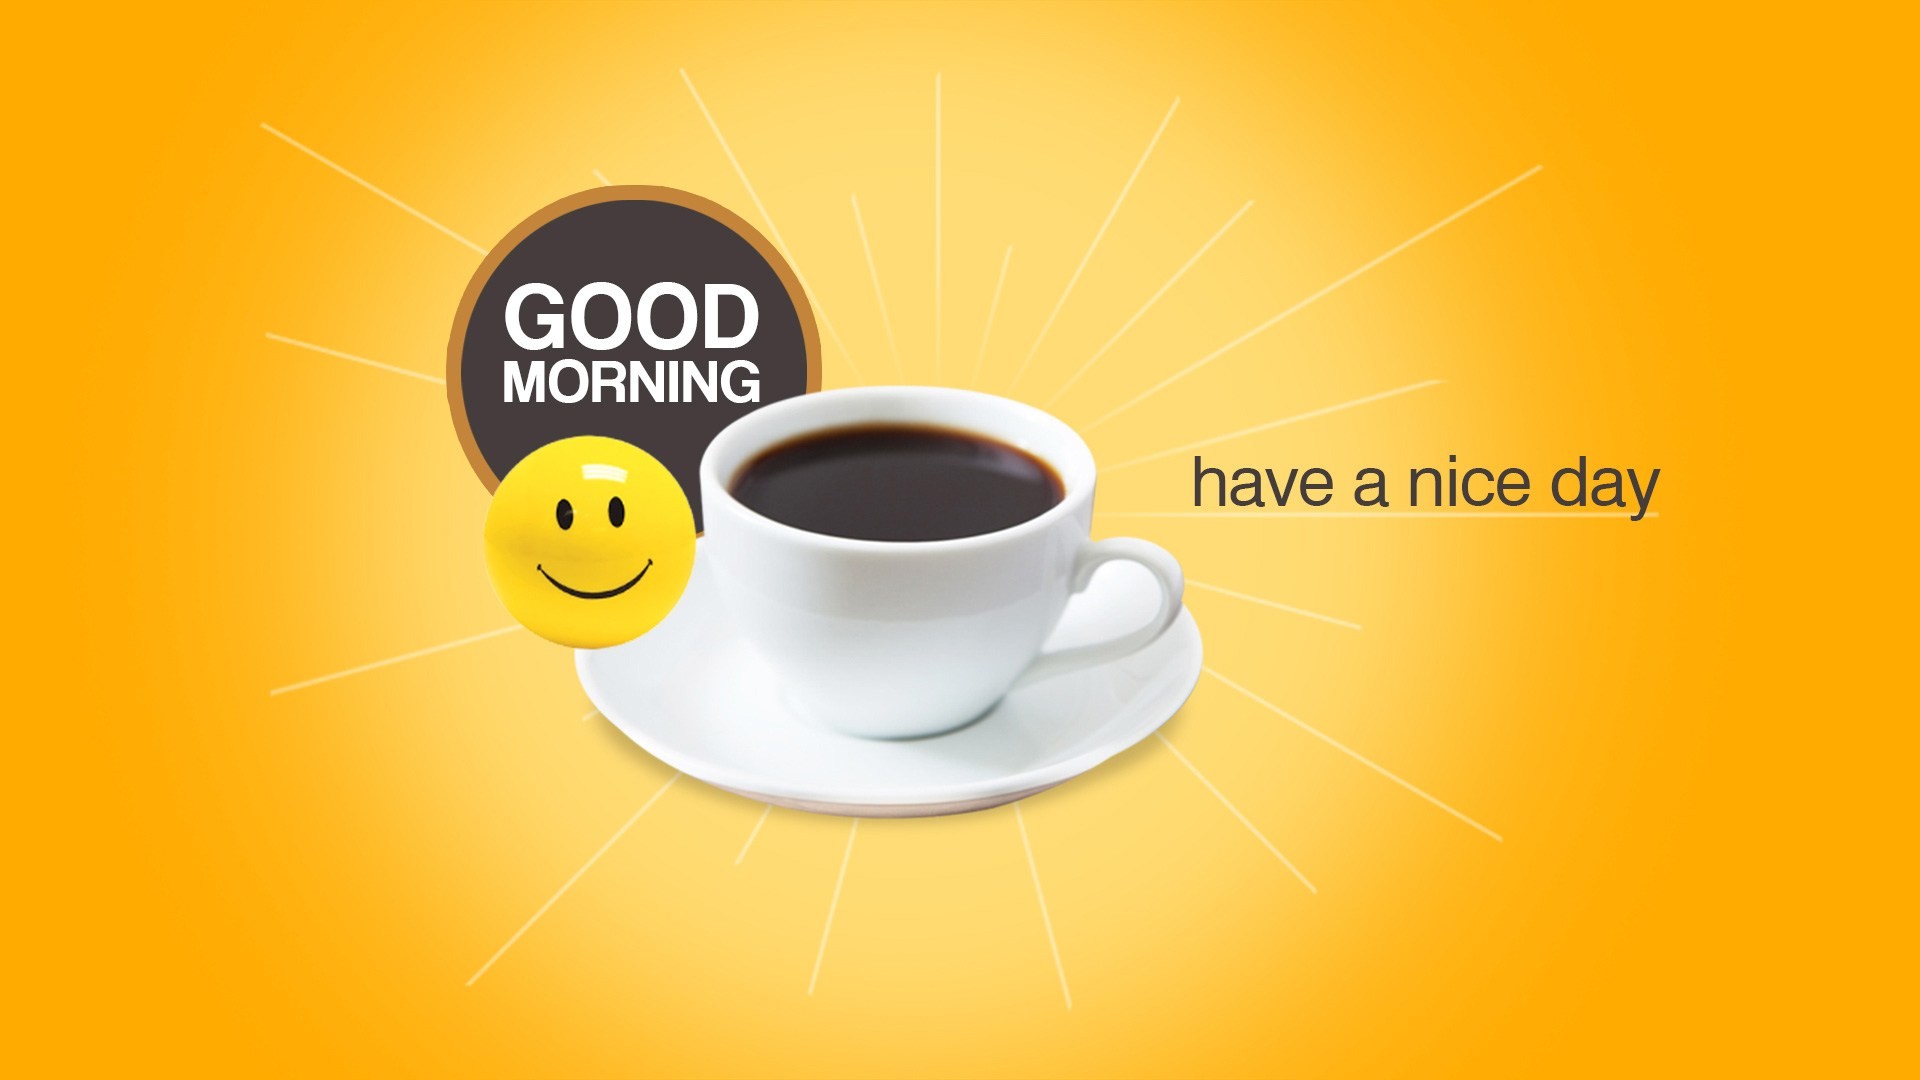 1920x1080 Good Morning Images, Good Morning Images HD, Good Morning msg, Good Morning  HD